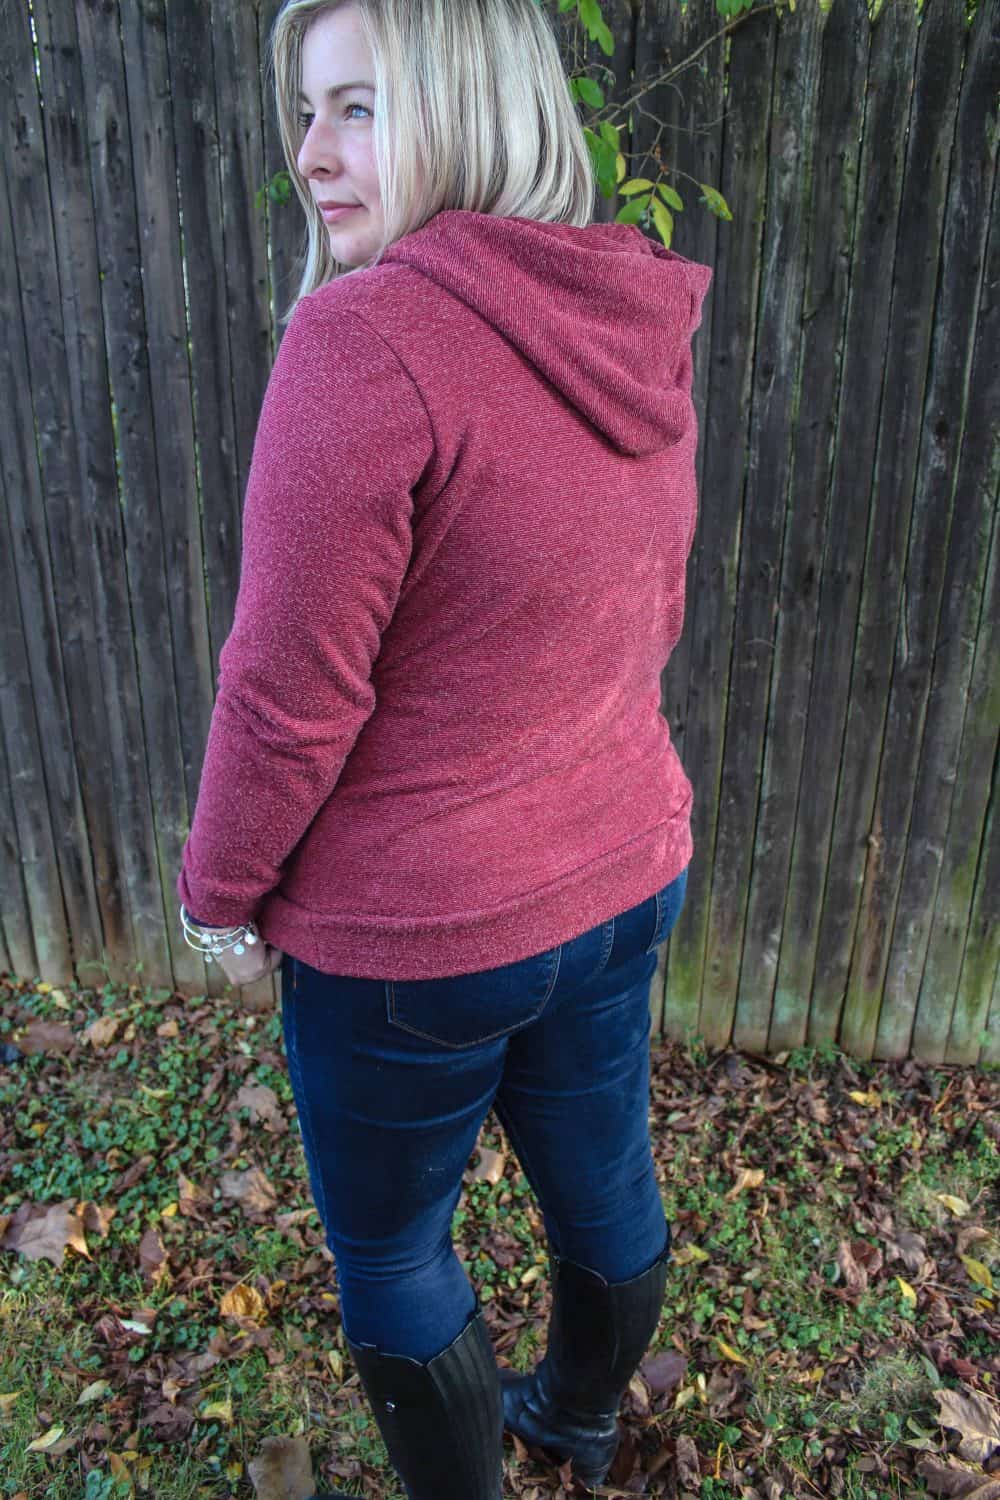 Easy and downloadable hoodie sewing pattern.